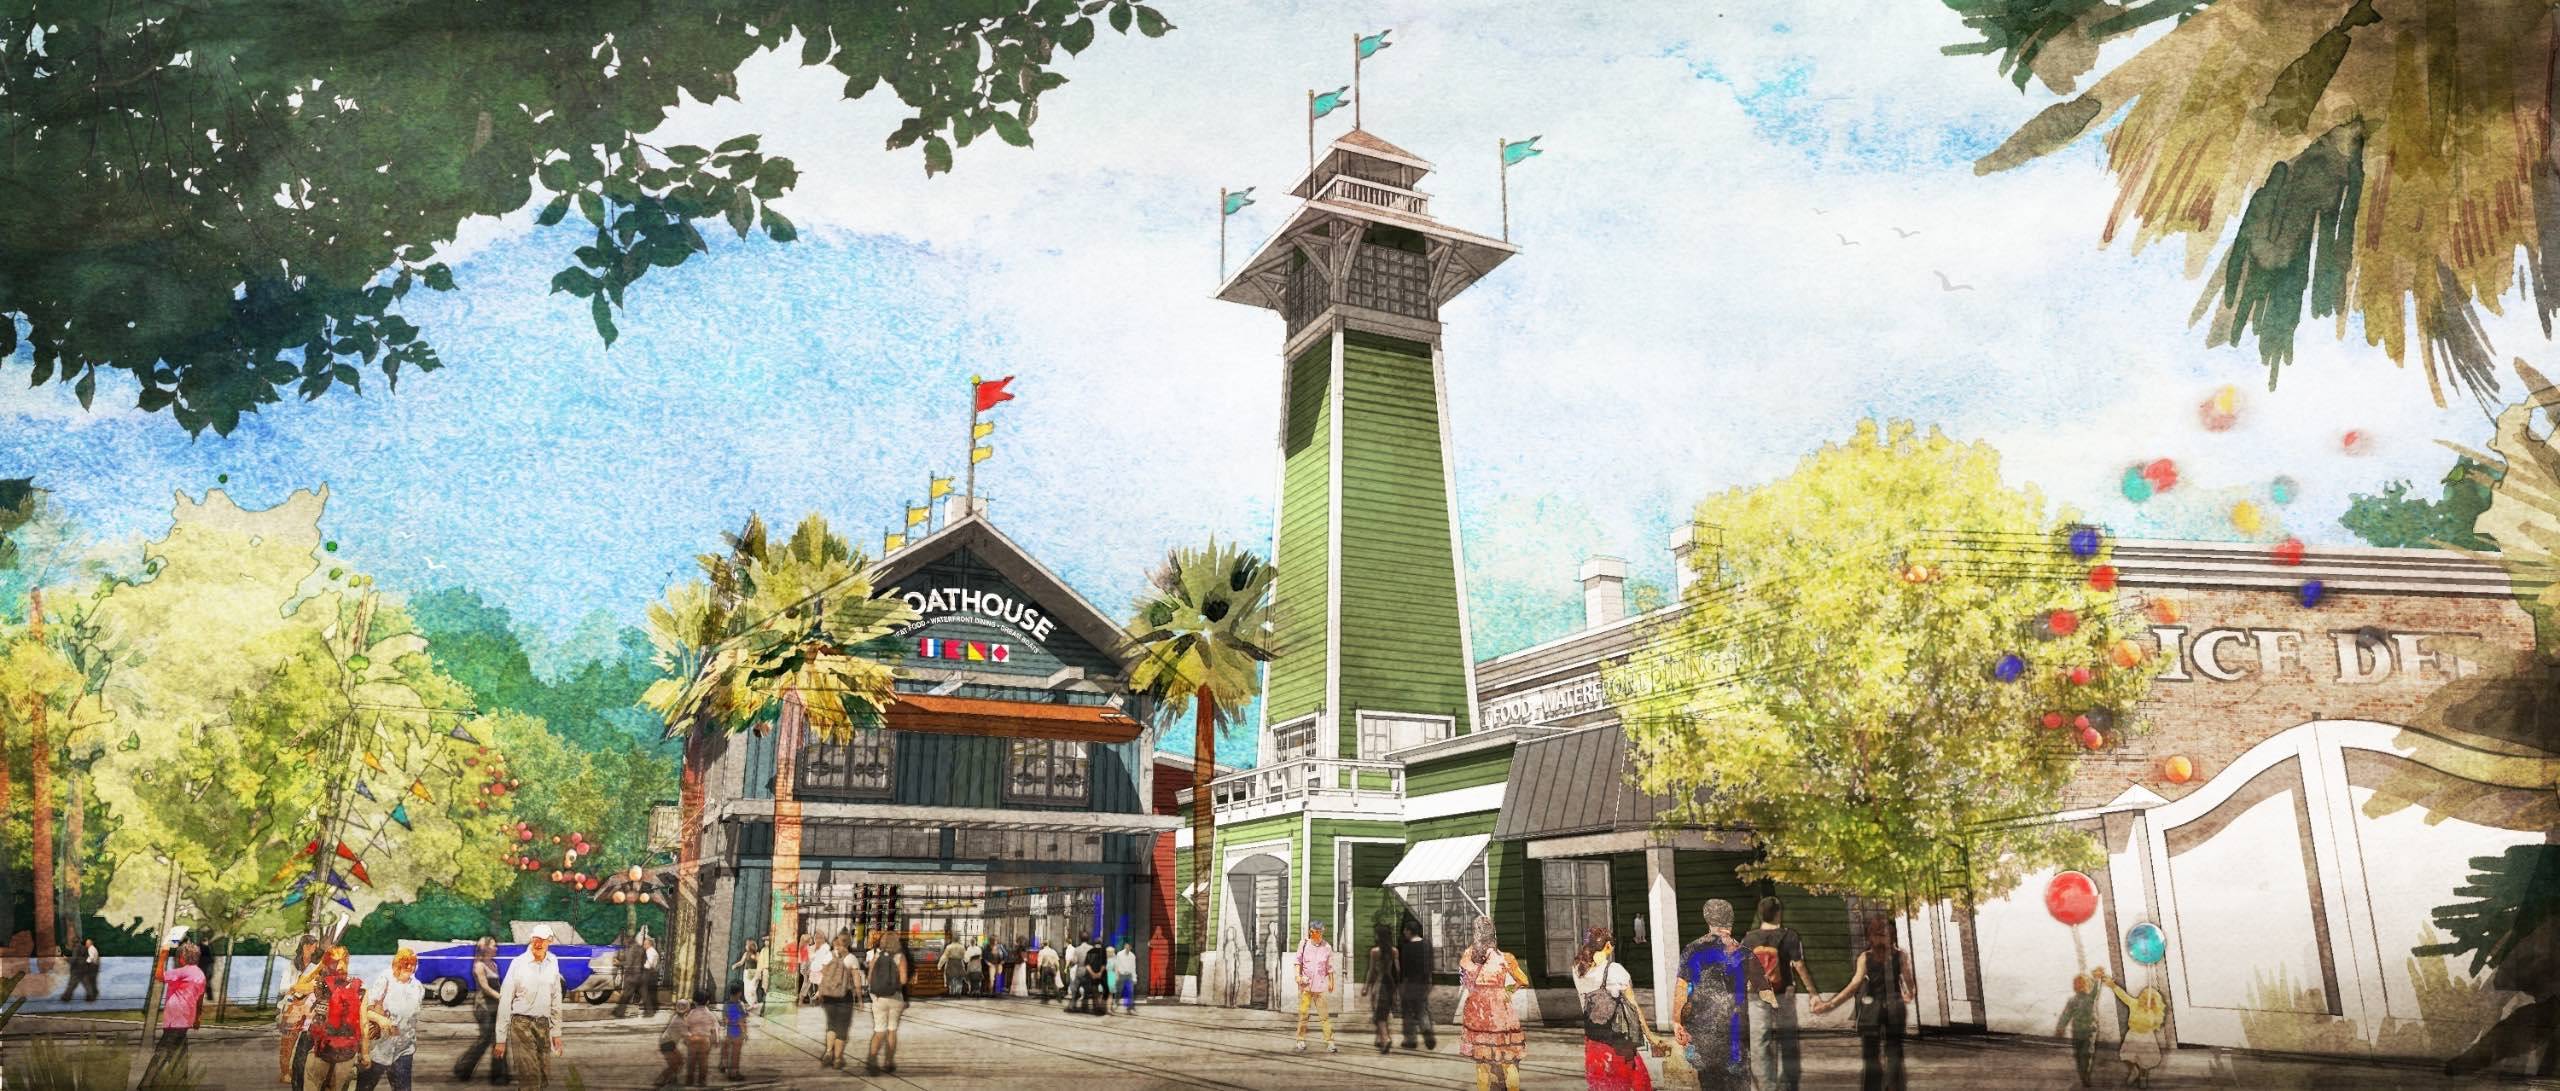 The BOATHOUSE restaurant confirmed for Disney Springs in 2015